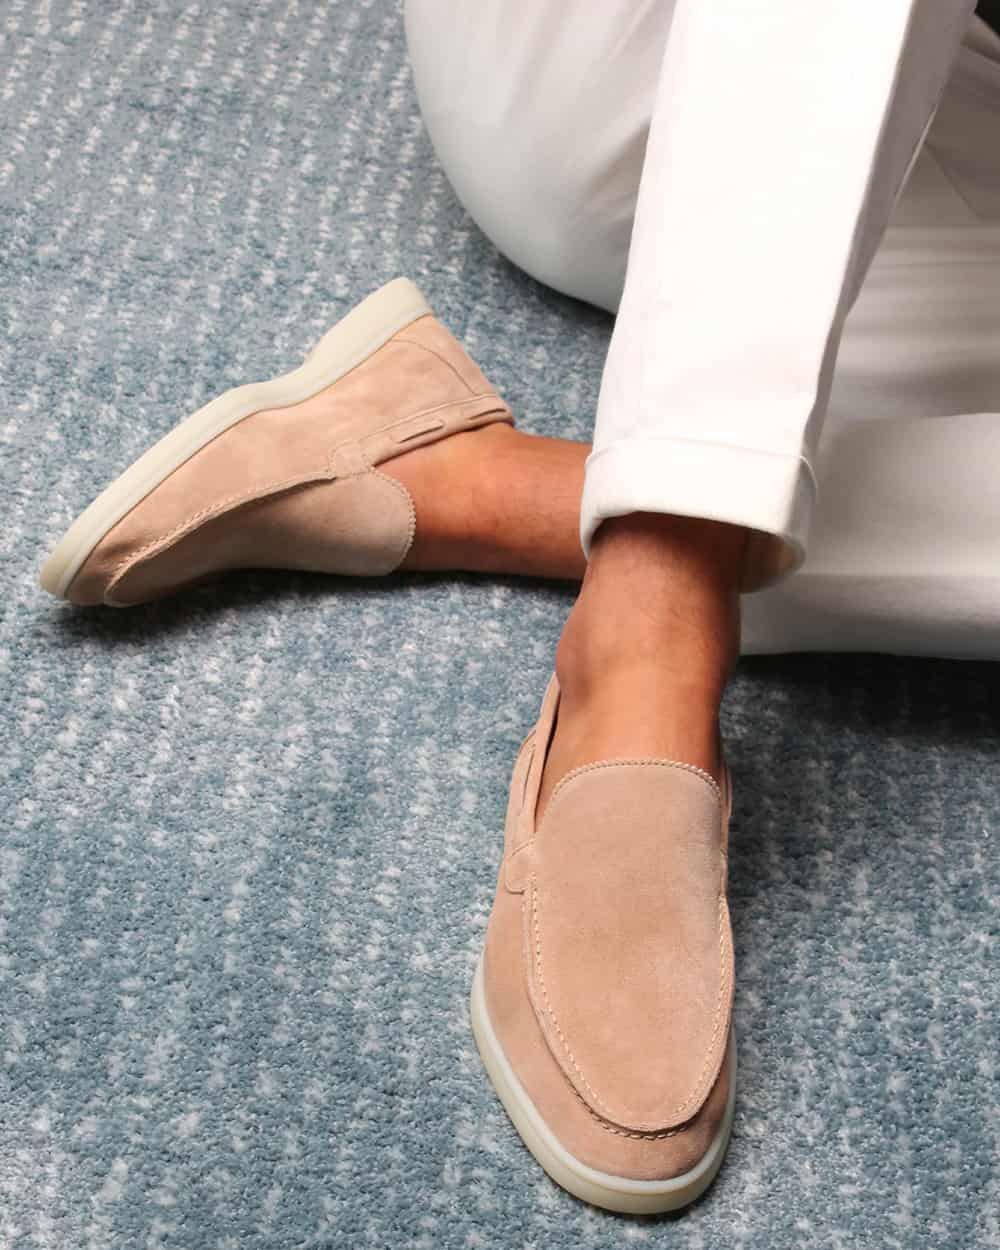 Man wearing beige suede slip-on loafers with white tailored pants and no socks